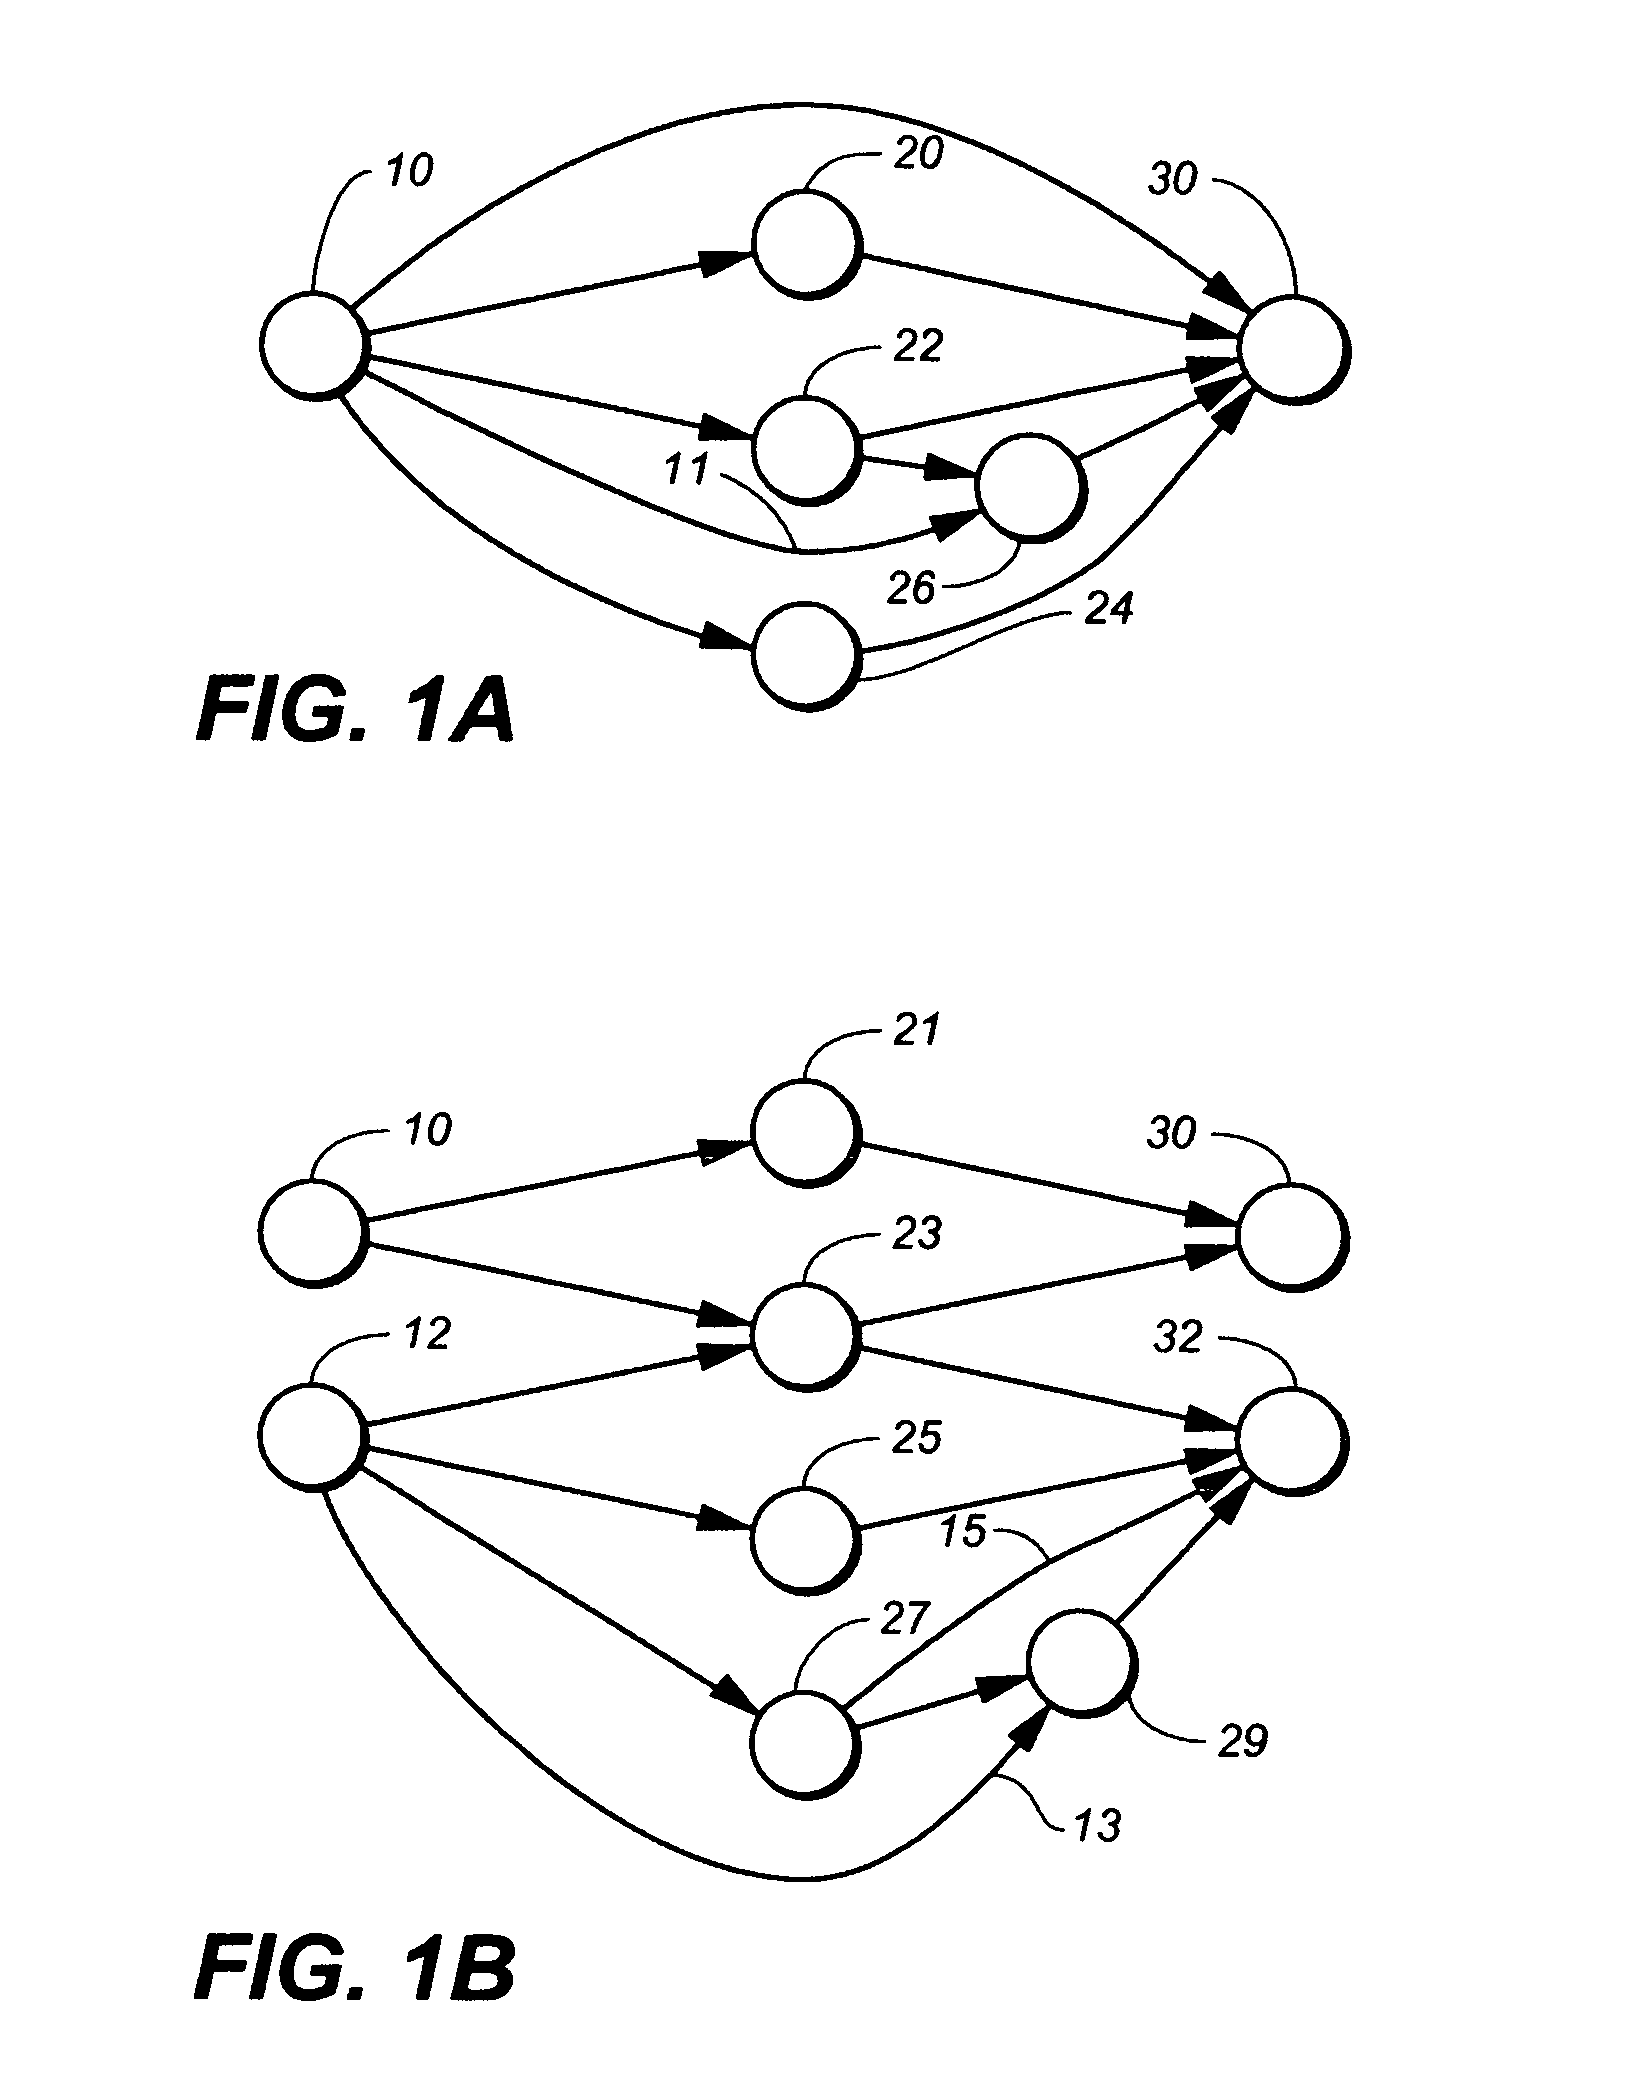 Method and apparatus for multihop network FEC encoding